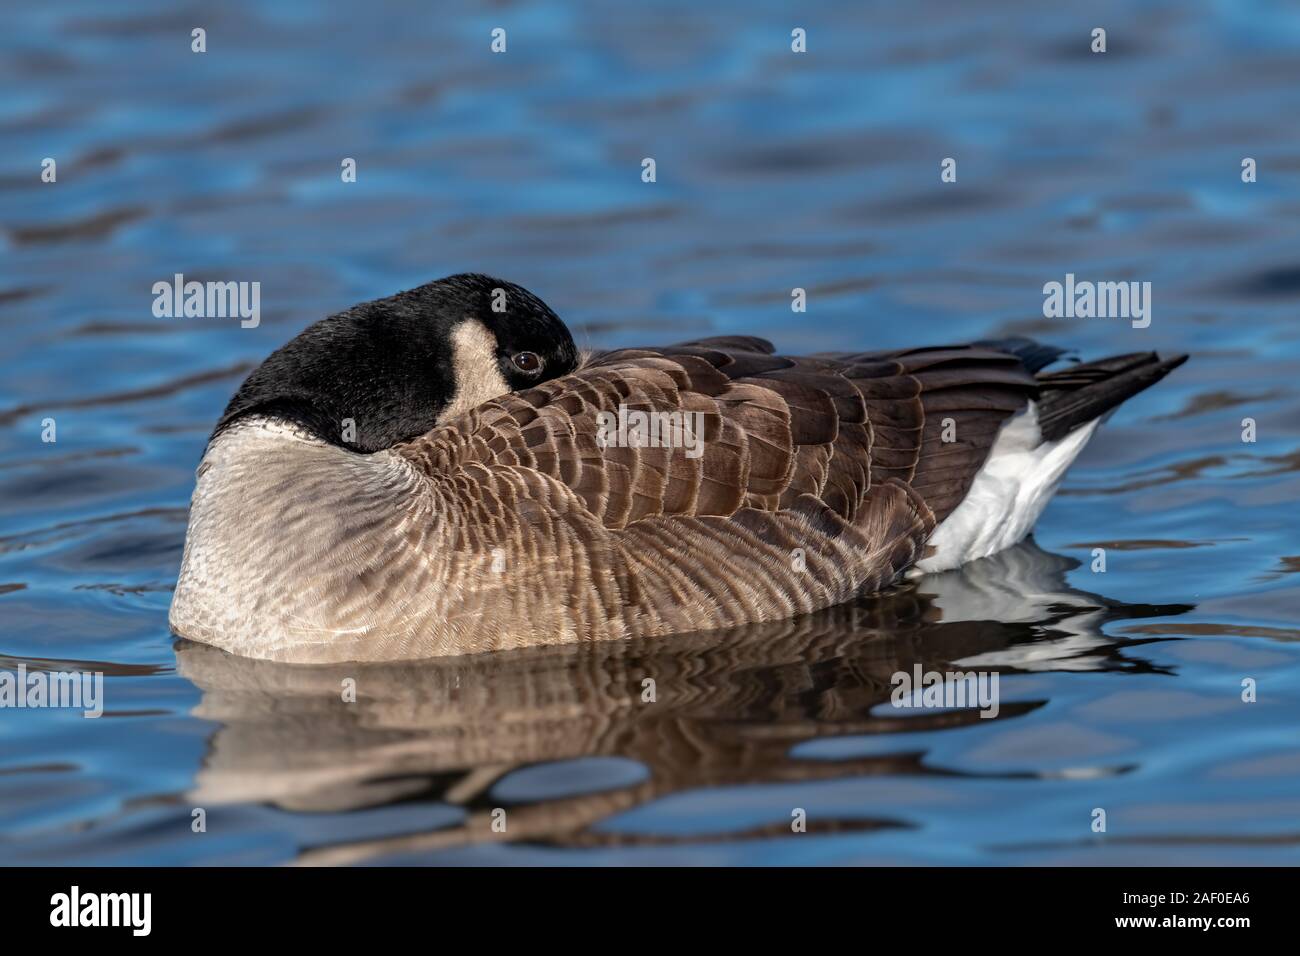 Canadian Goose swimming in a small lake. Stock Photo